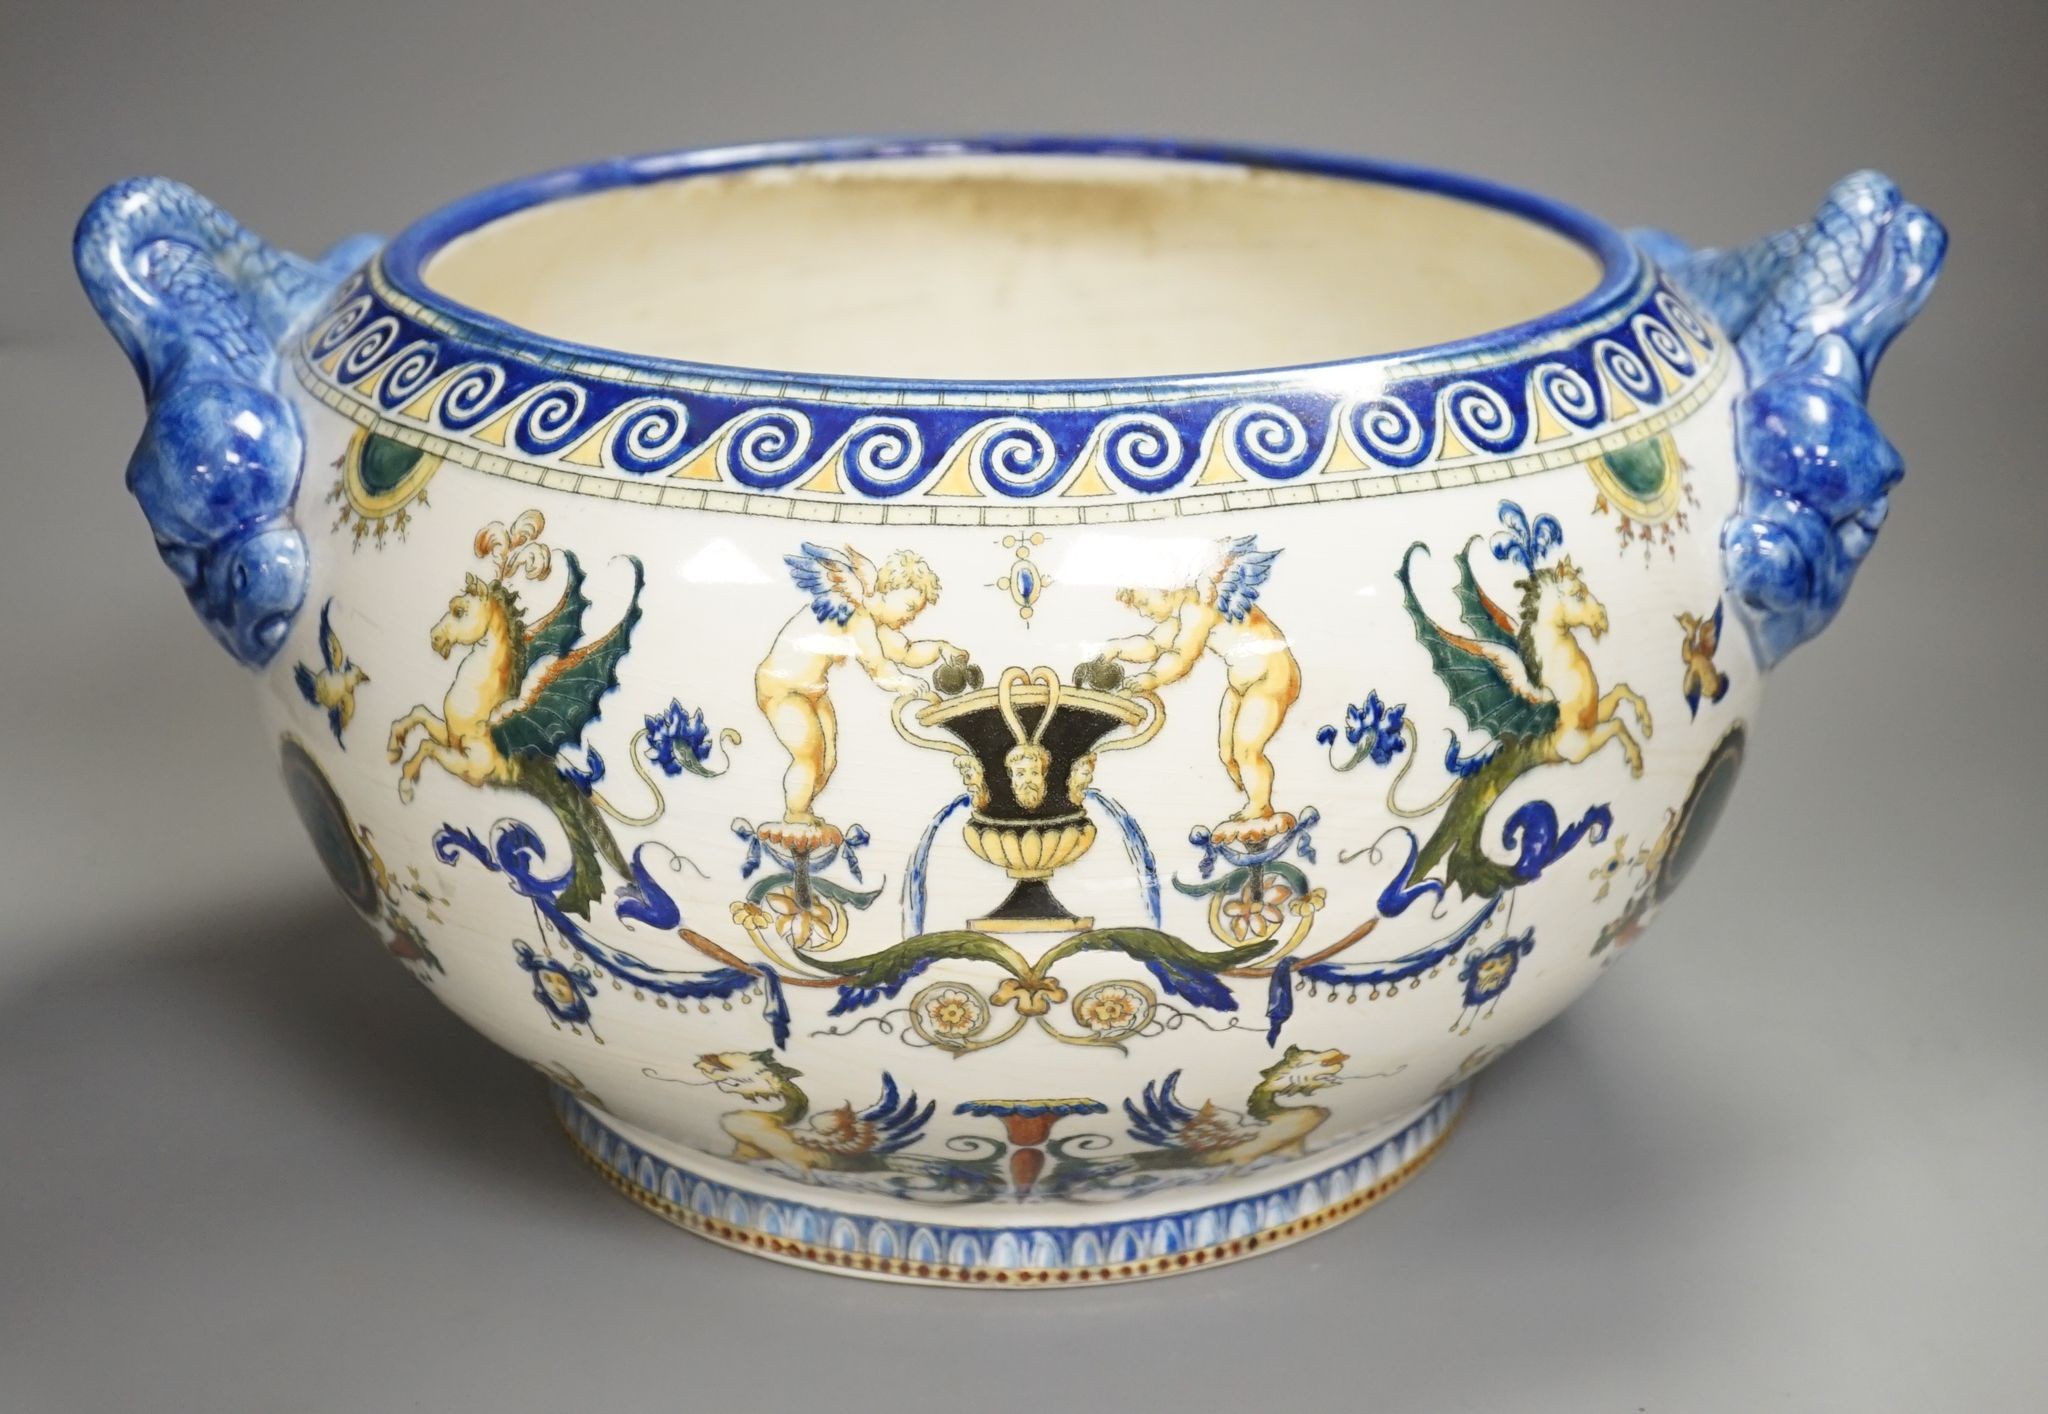 A French 19th century Gien pottery jardiniere with dolphin handles, 41 cms wide including handles.